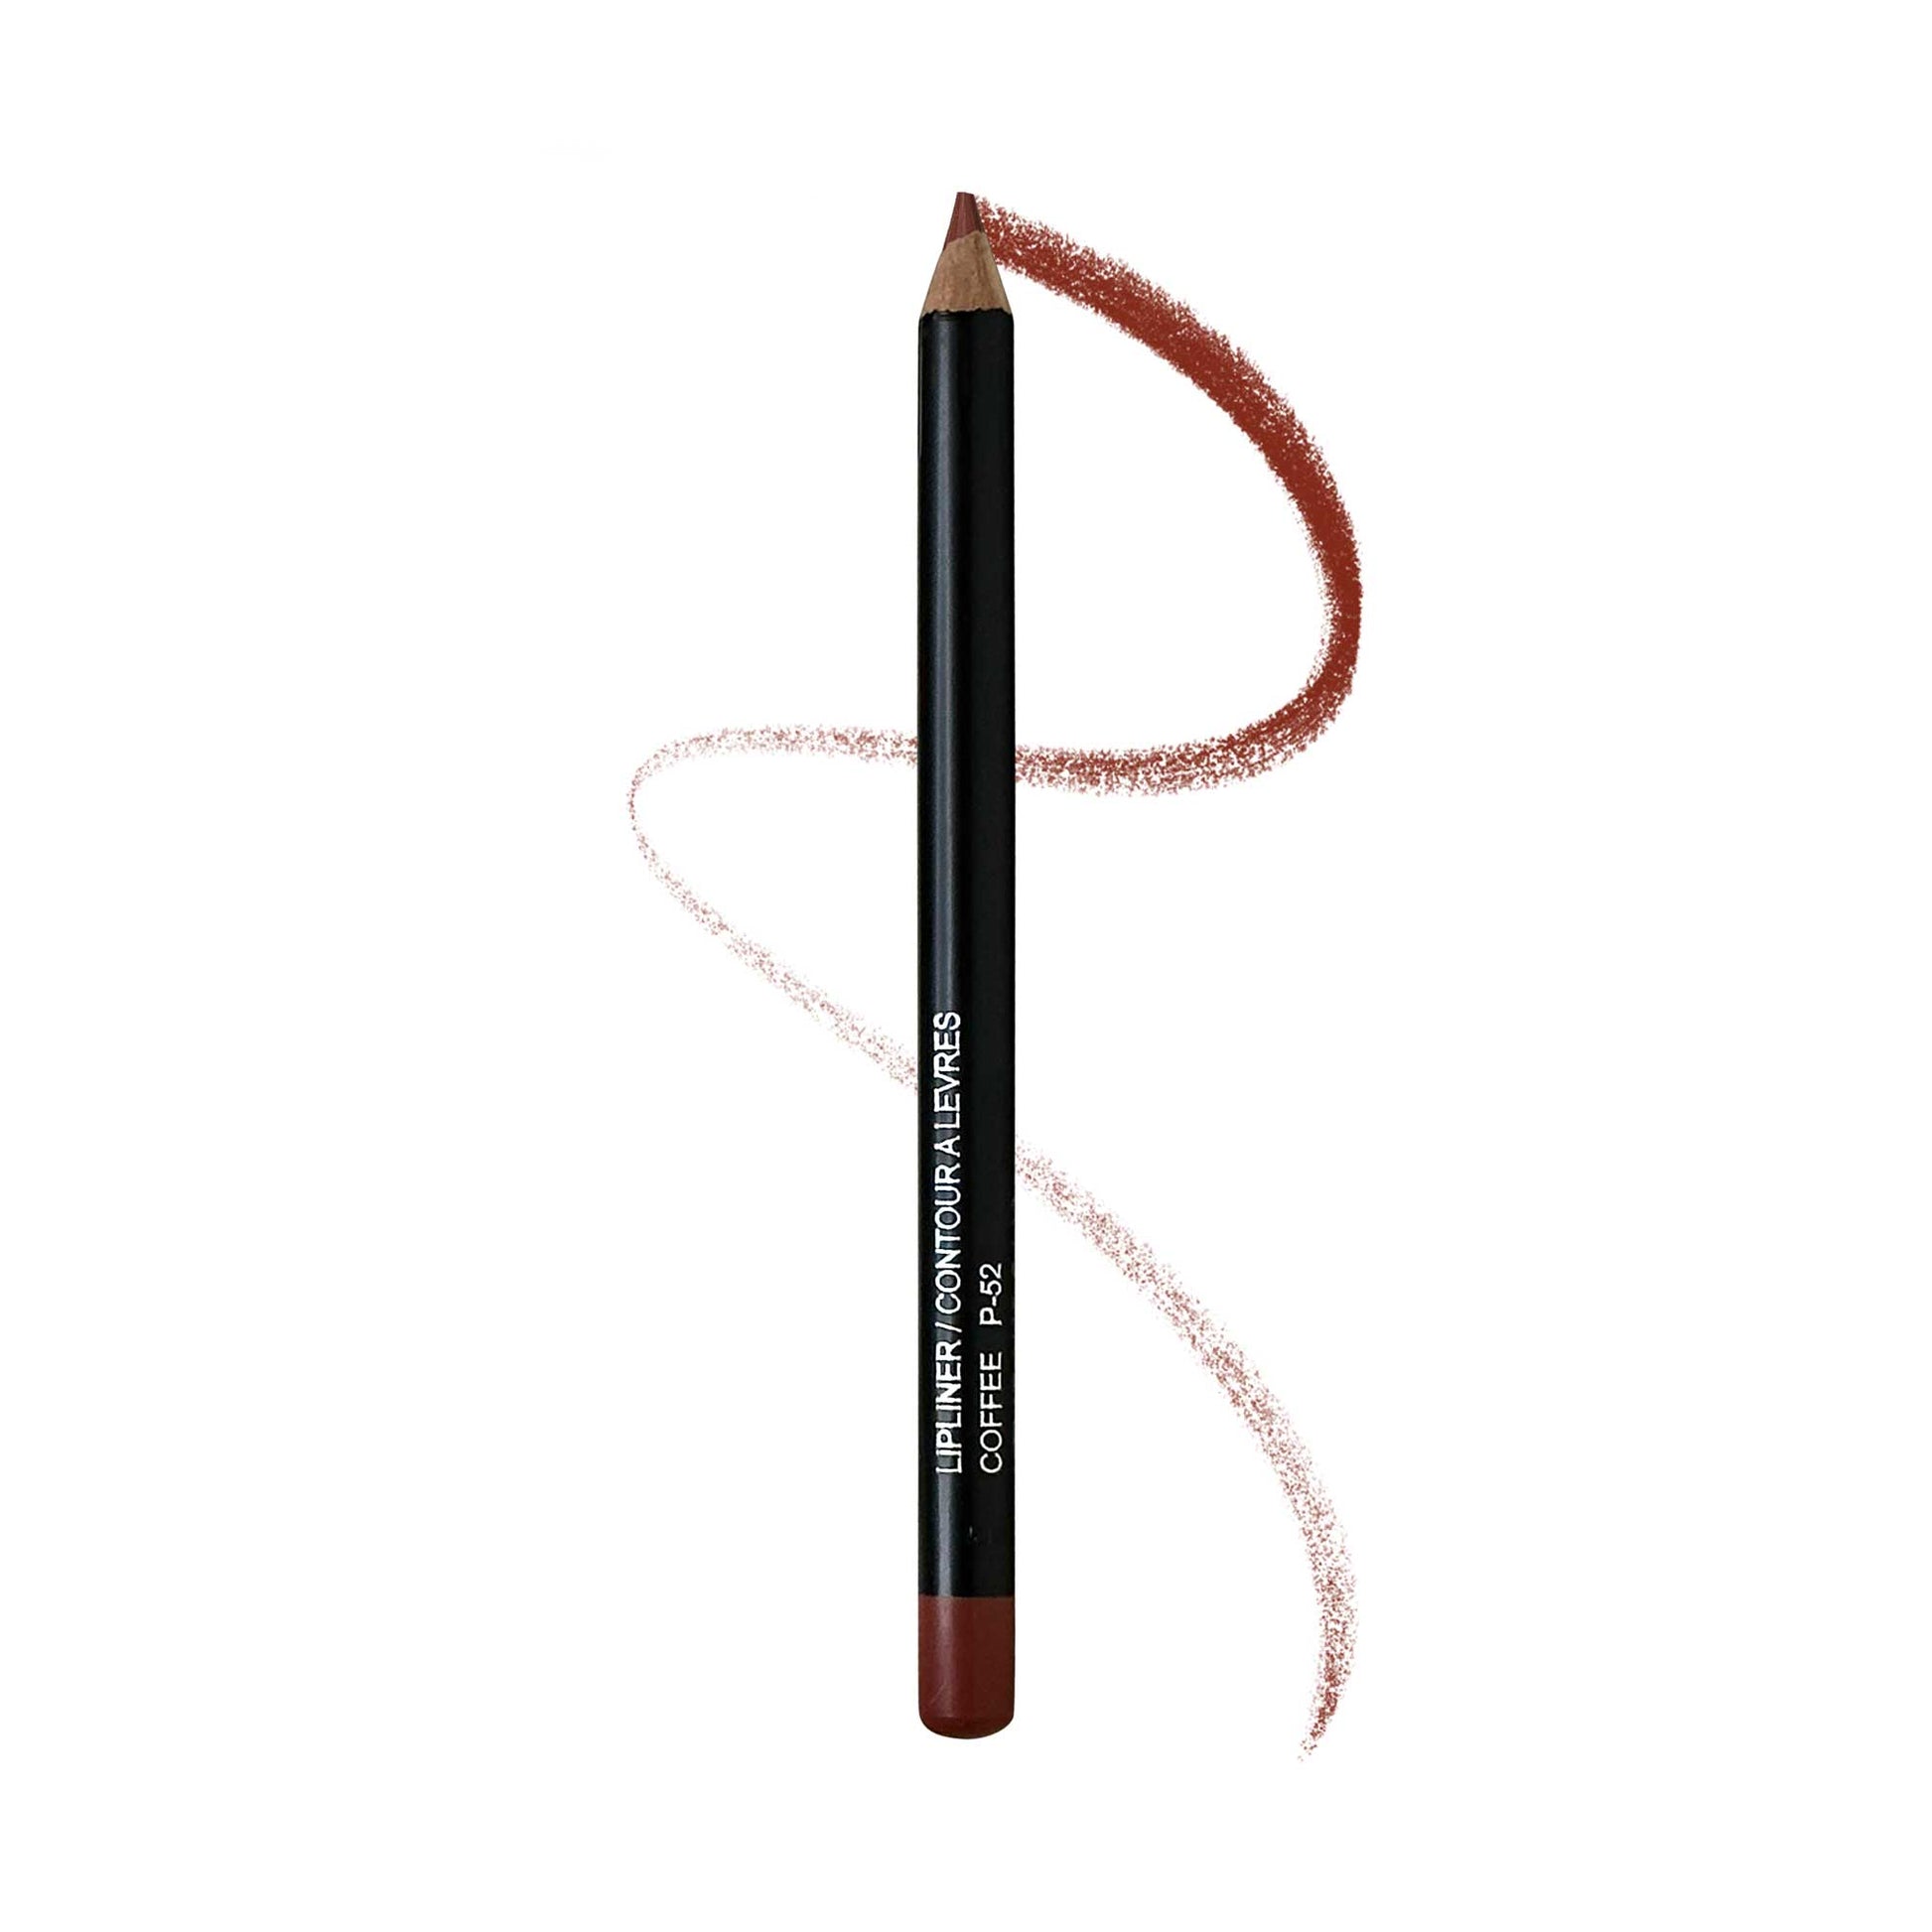 Cruisin Organics Coffee Lip Liner with rich, luxurious, bold pigments for all-day definition. Enhance and enliven your lips with the sophisticated and exclusive shade of coffee.